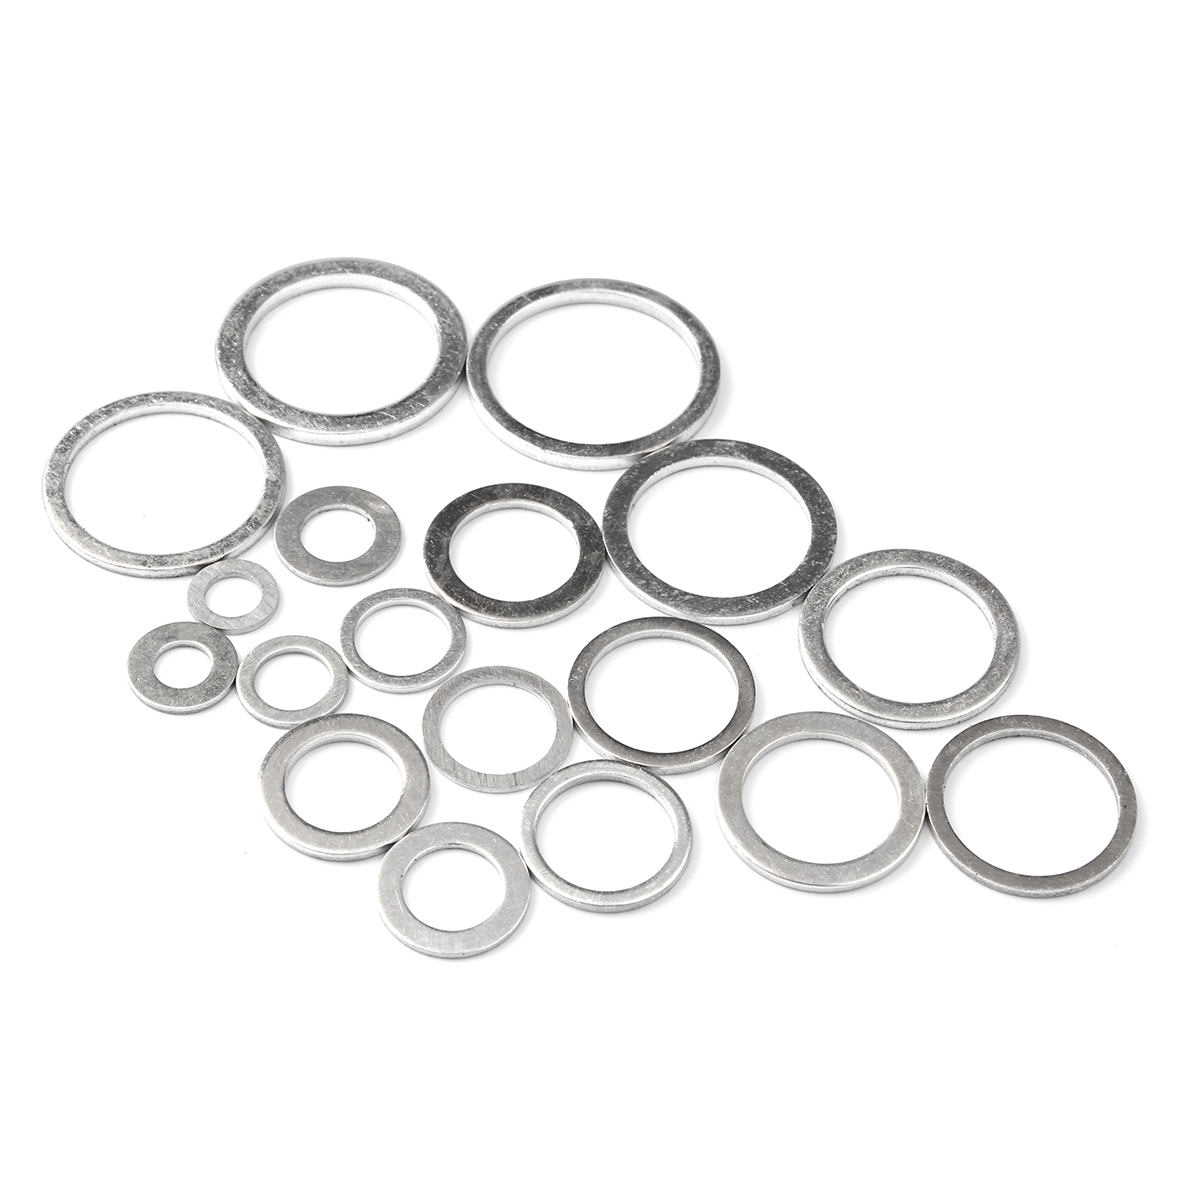 450Pcs Assorted Gaskets Washers Gasket Aluminum Flat Metal Washer Gasket Assorted Aluminum Sealing Rings Set With Case